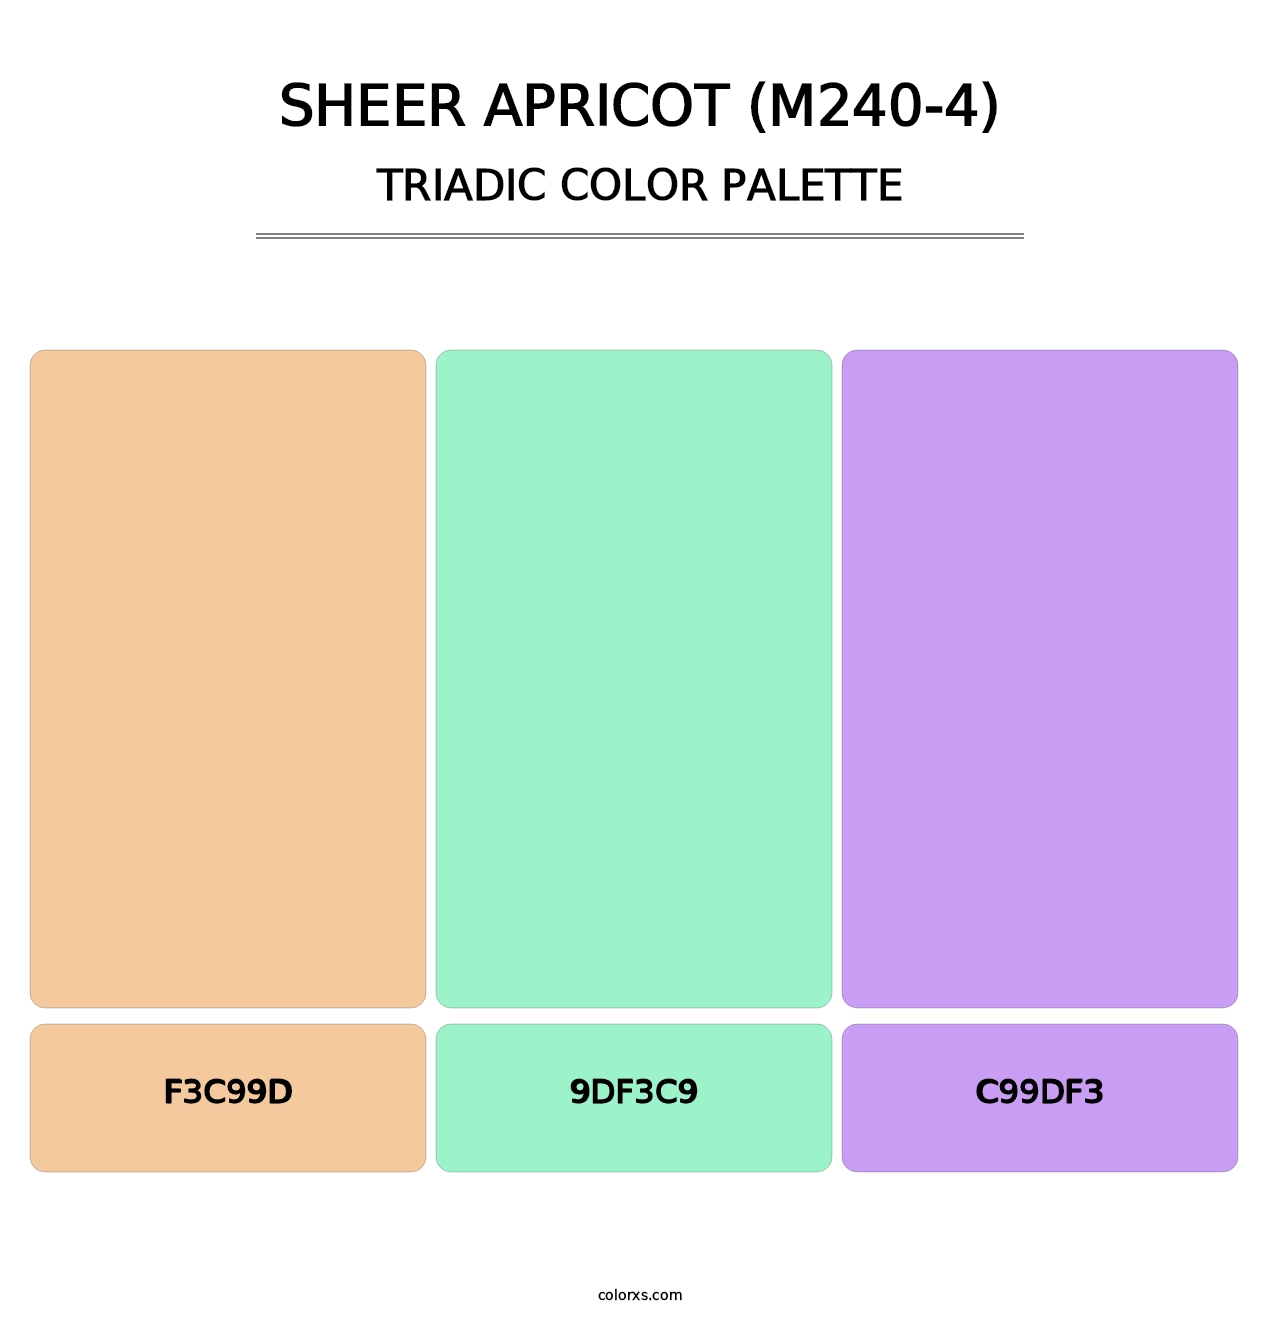 Sheer Apricot (M240-4) - Triadic Color Palette